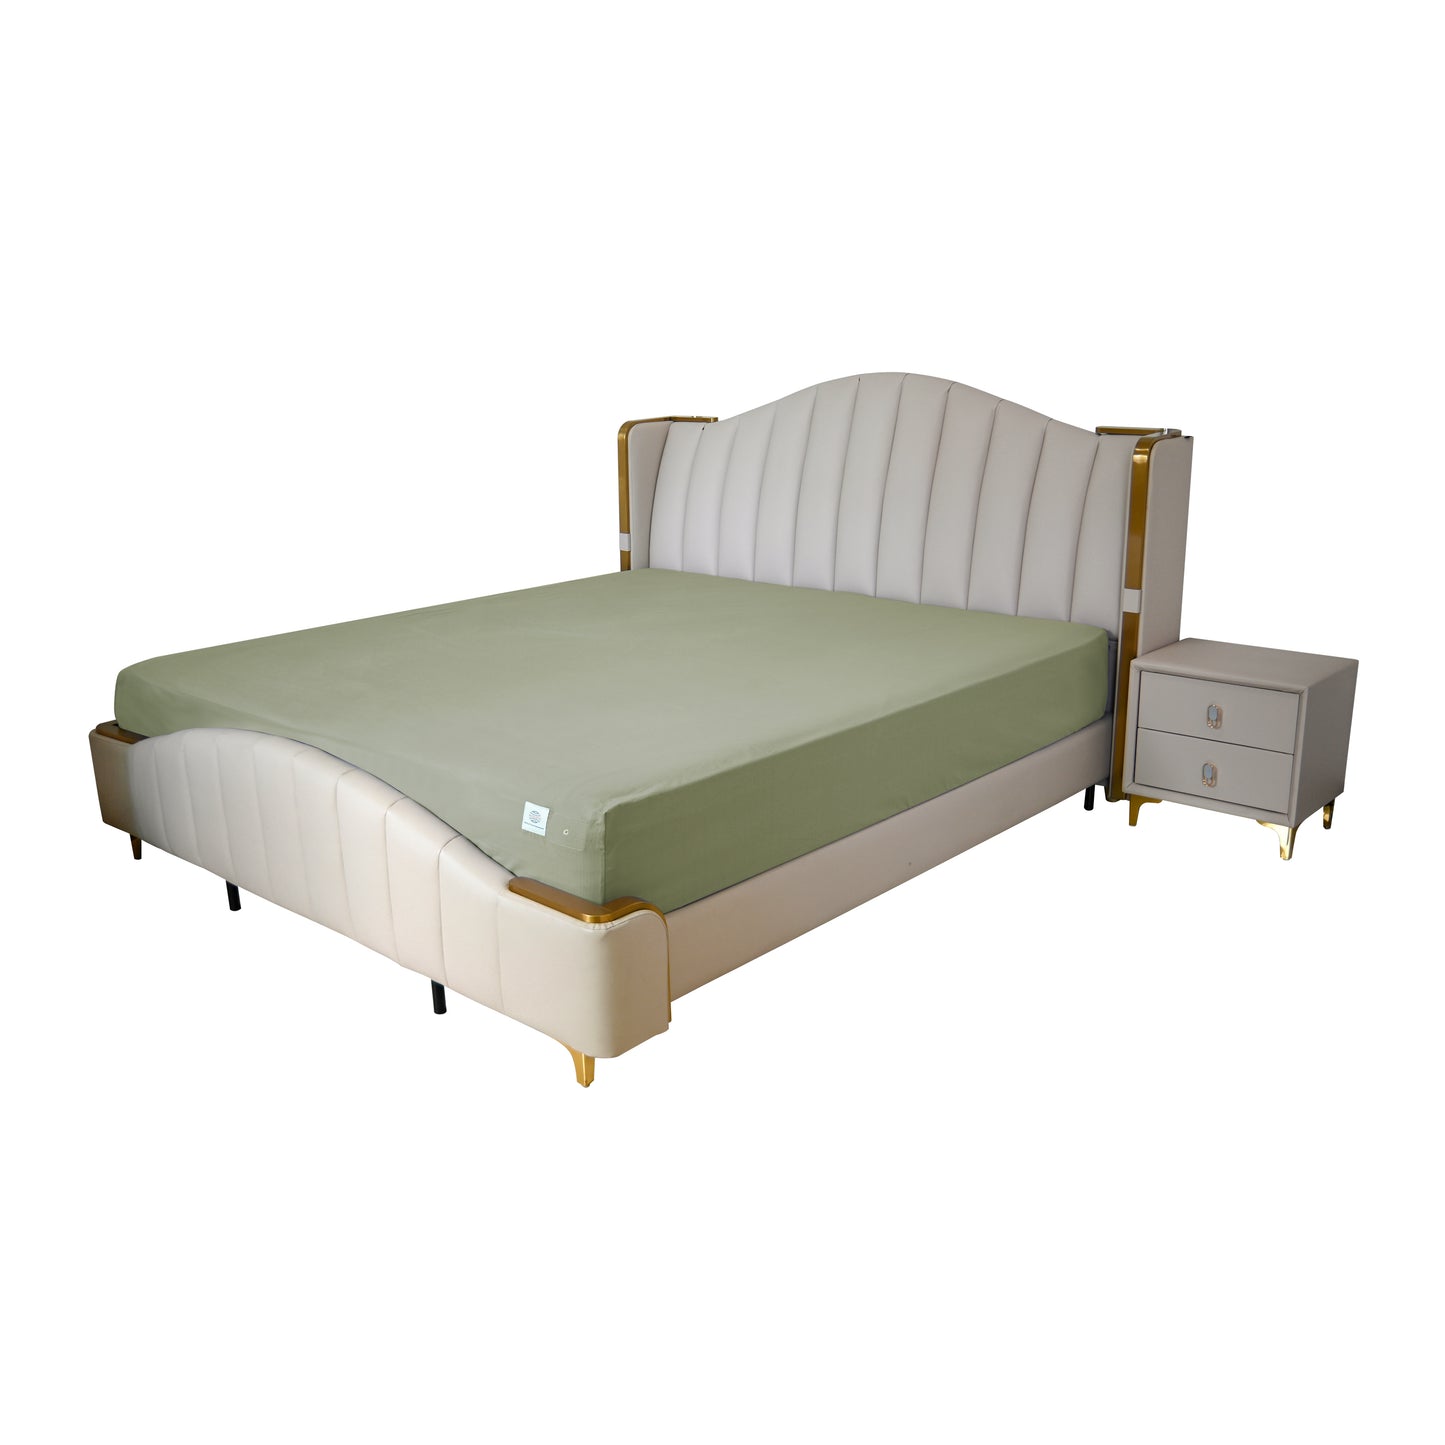 MaxEarthing Fitted Bed sheet